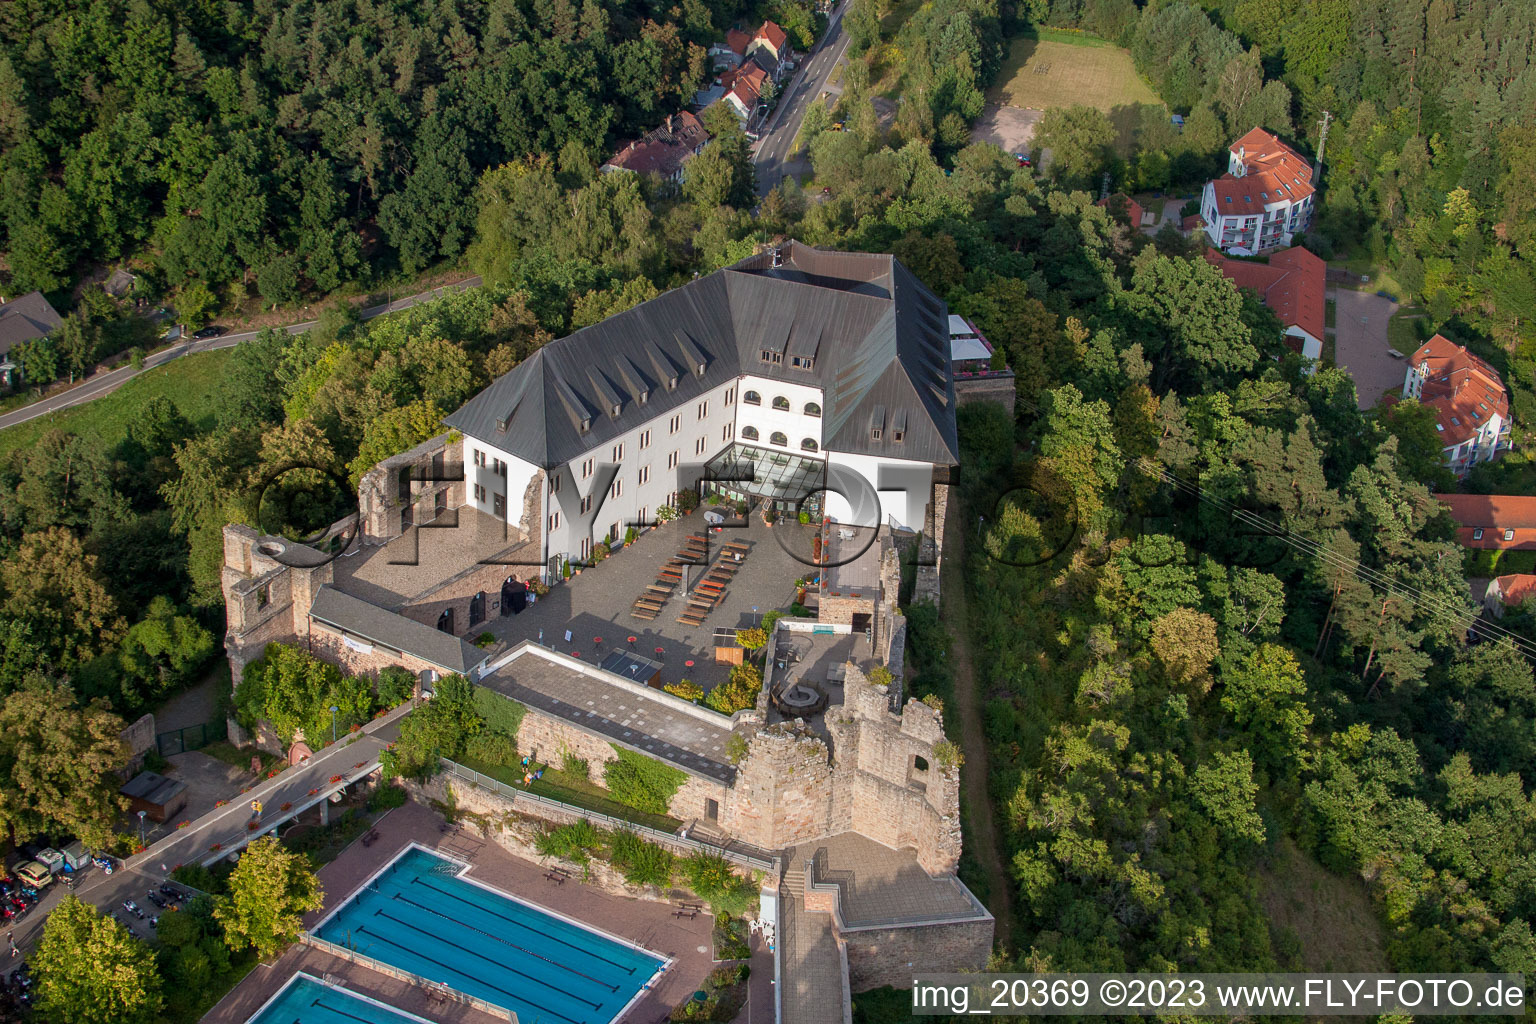 Altleiningen in the state Rhineland-Palatinate, Germany from the drone perspective